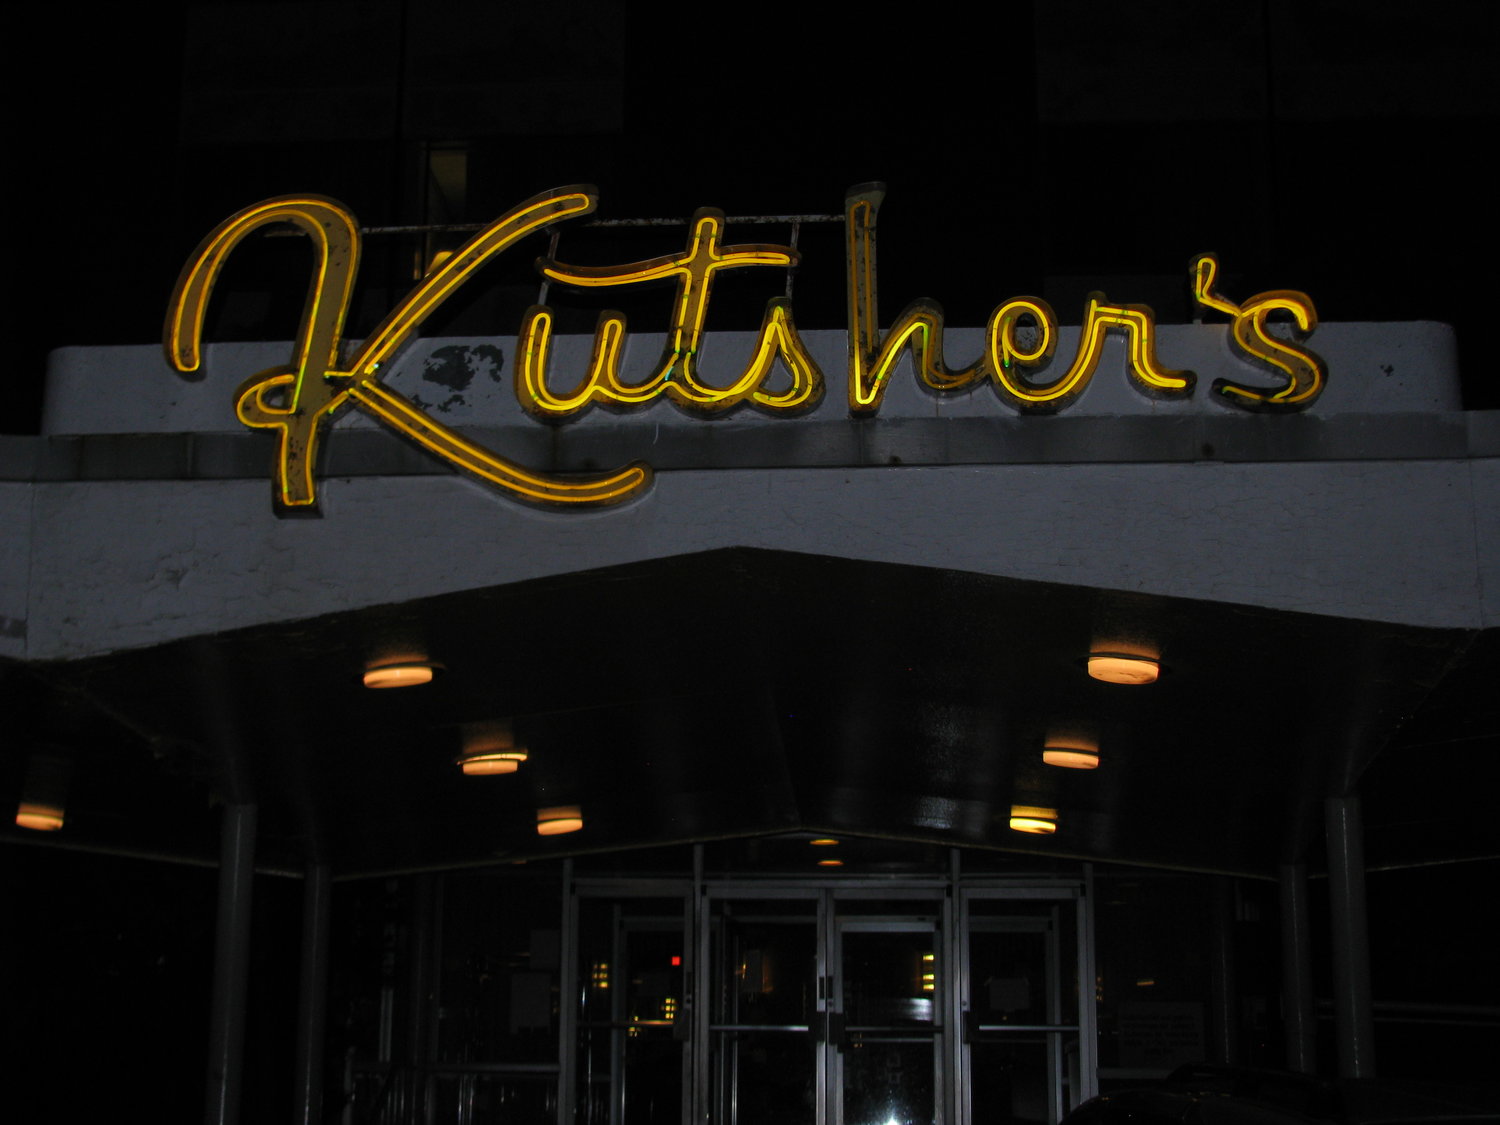 Kutsher’s Hotel and Country Club was the longest-operating family-owned Catskills resort. The sign that Eckers owned welcomed guests as they entered.